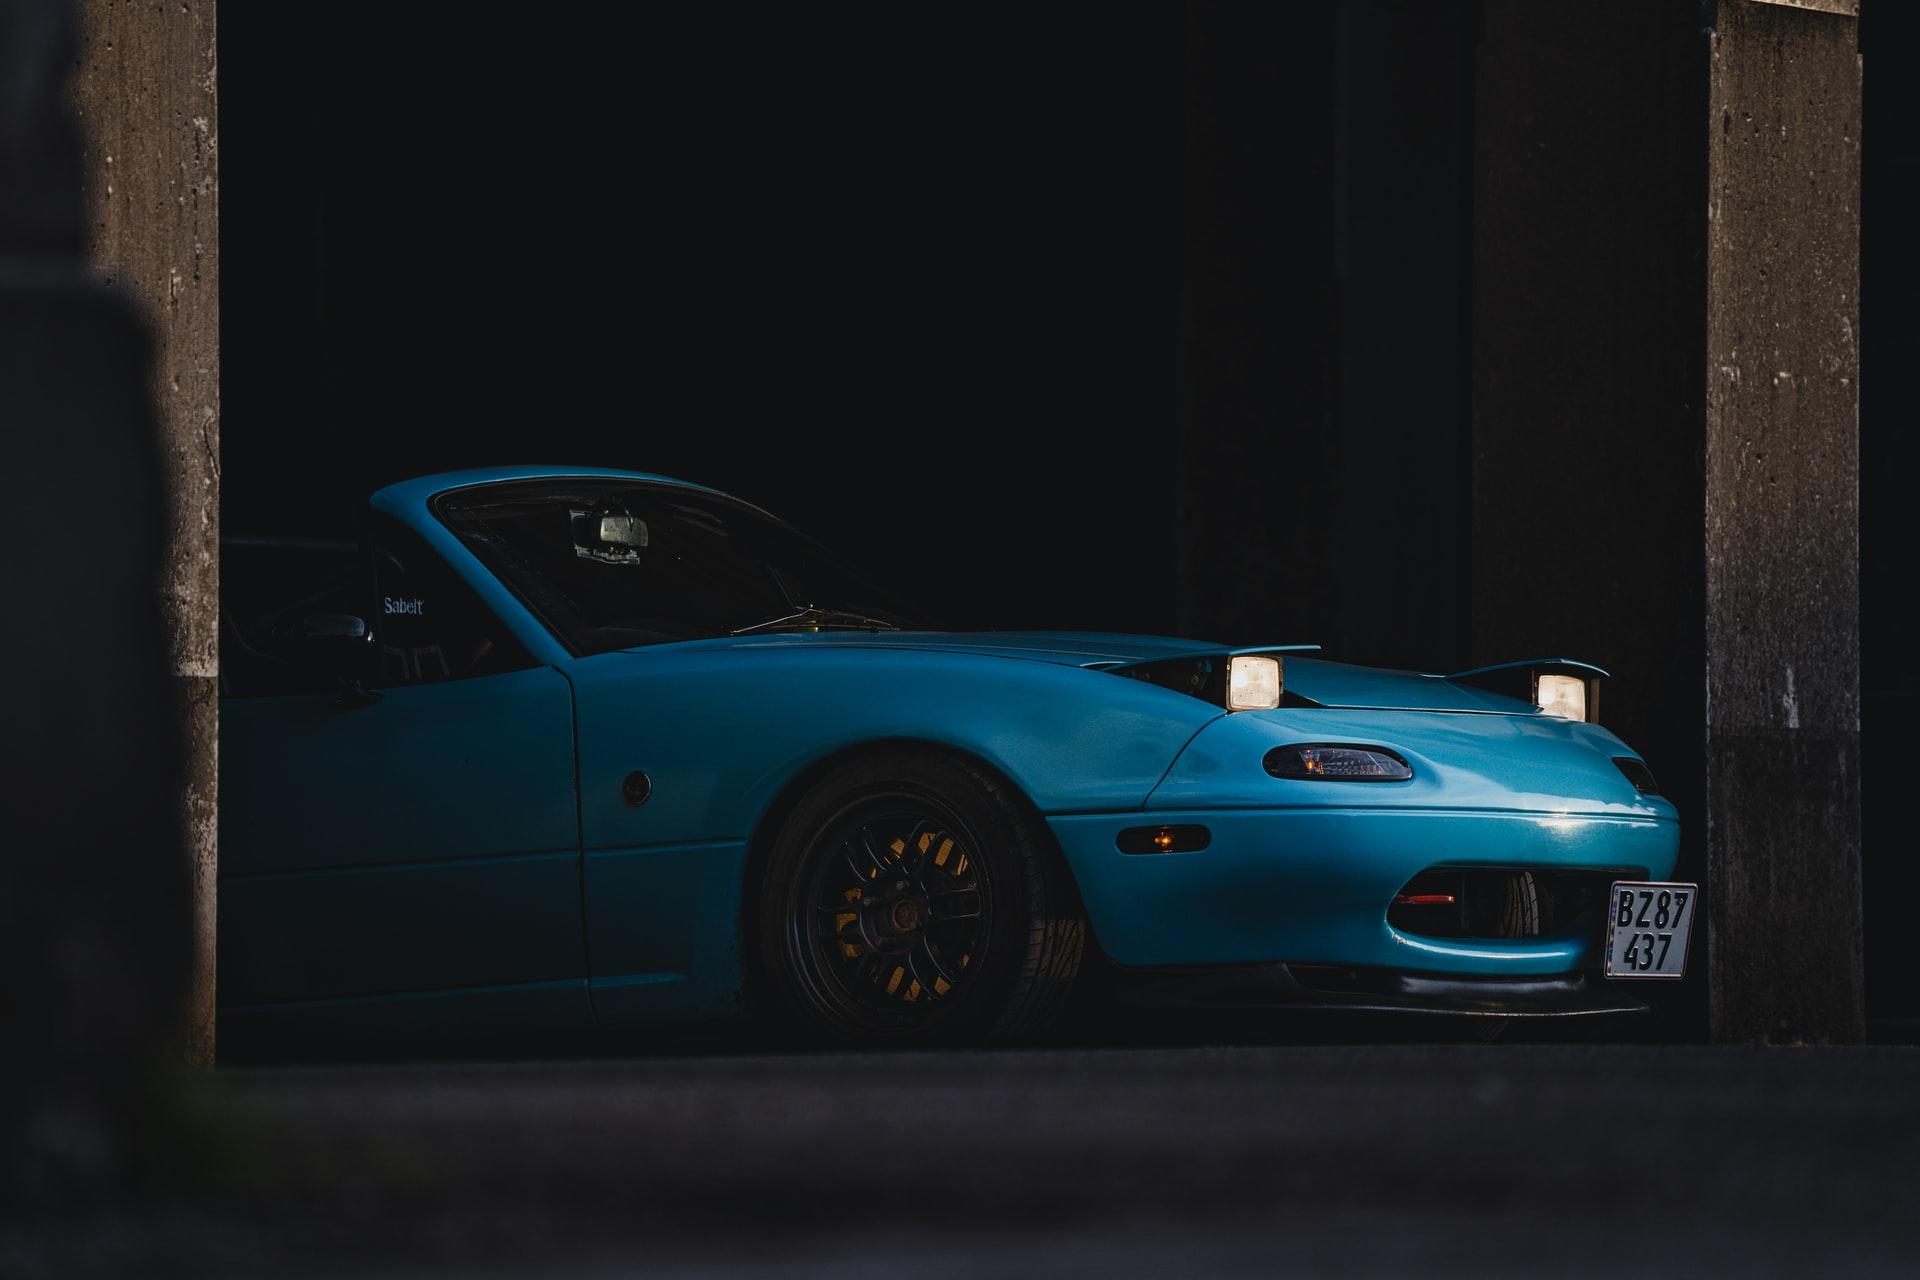 The Miata is thought to be one of the best sports cars ever made.